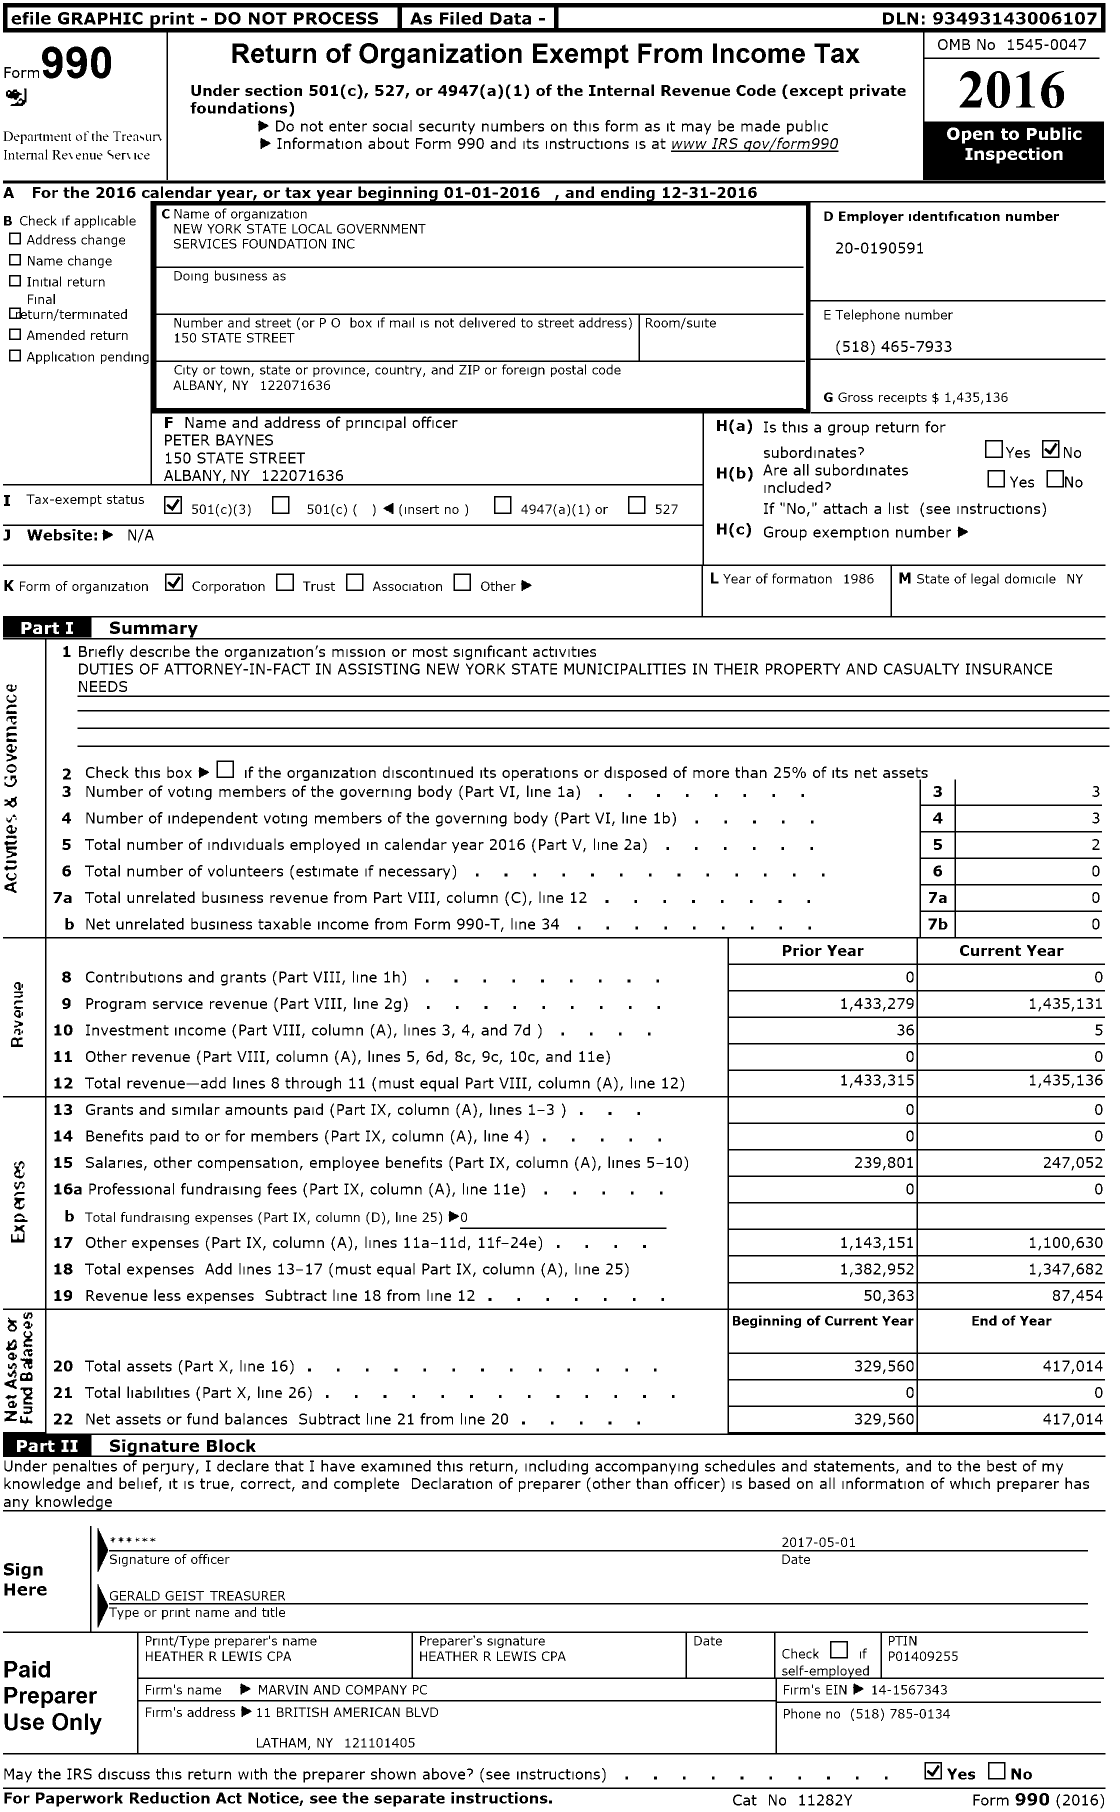 Image of first page of 2016 Form 990 for New York State Local Government Services Foundation